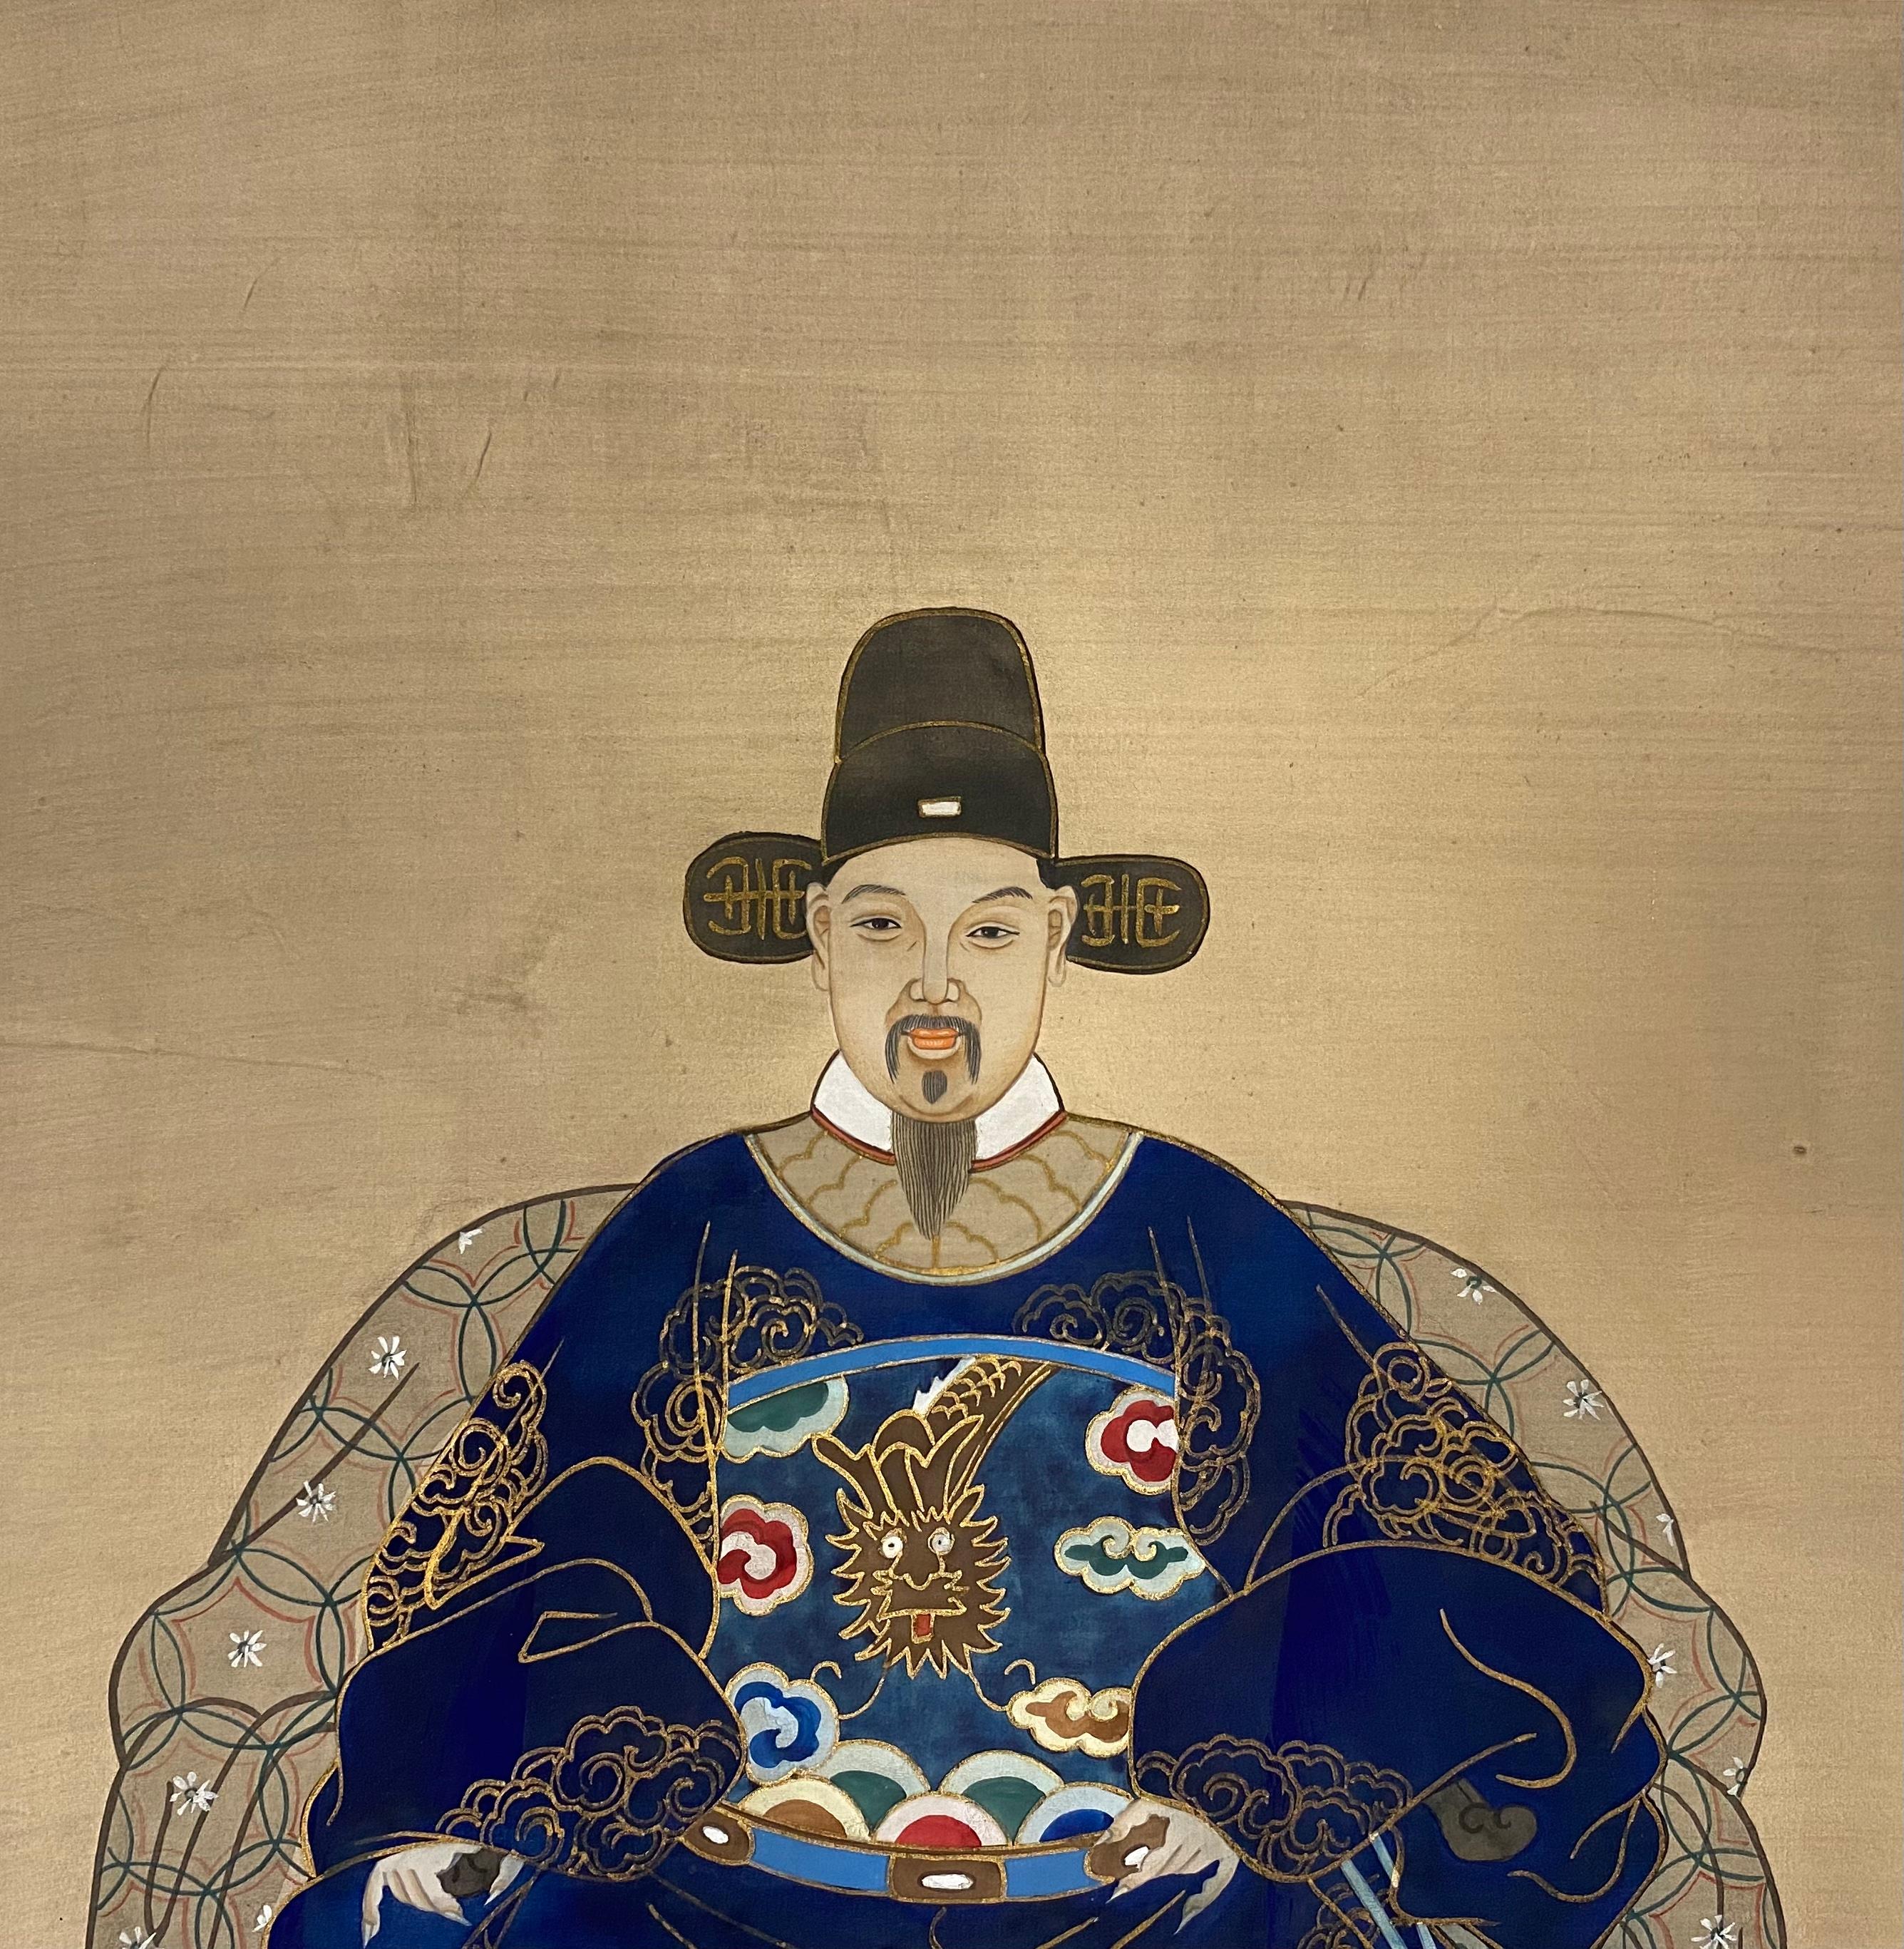 Antique 19th century painting on silk depicting a Ming Dynasty Chinese emperor.

Beautifully executed with great details.  Hand-painted original work, presented in a beautiful frame.  

Chinese artisans traditionally made silk paintings.